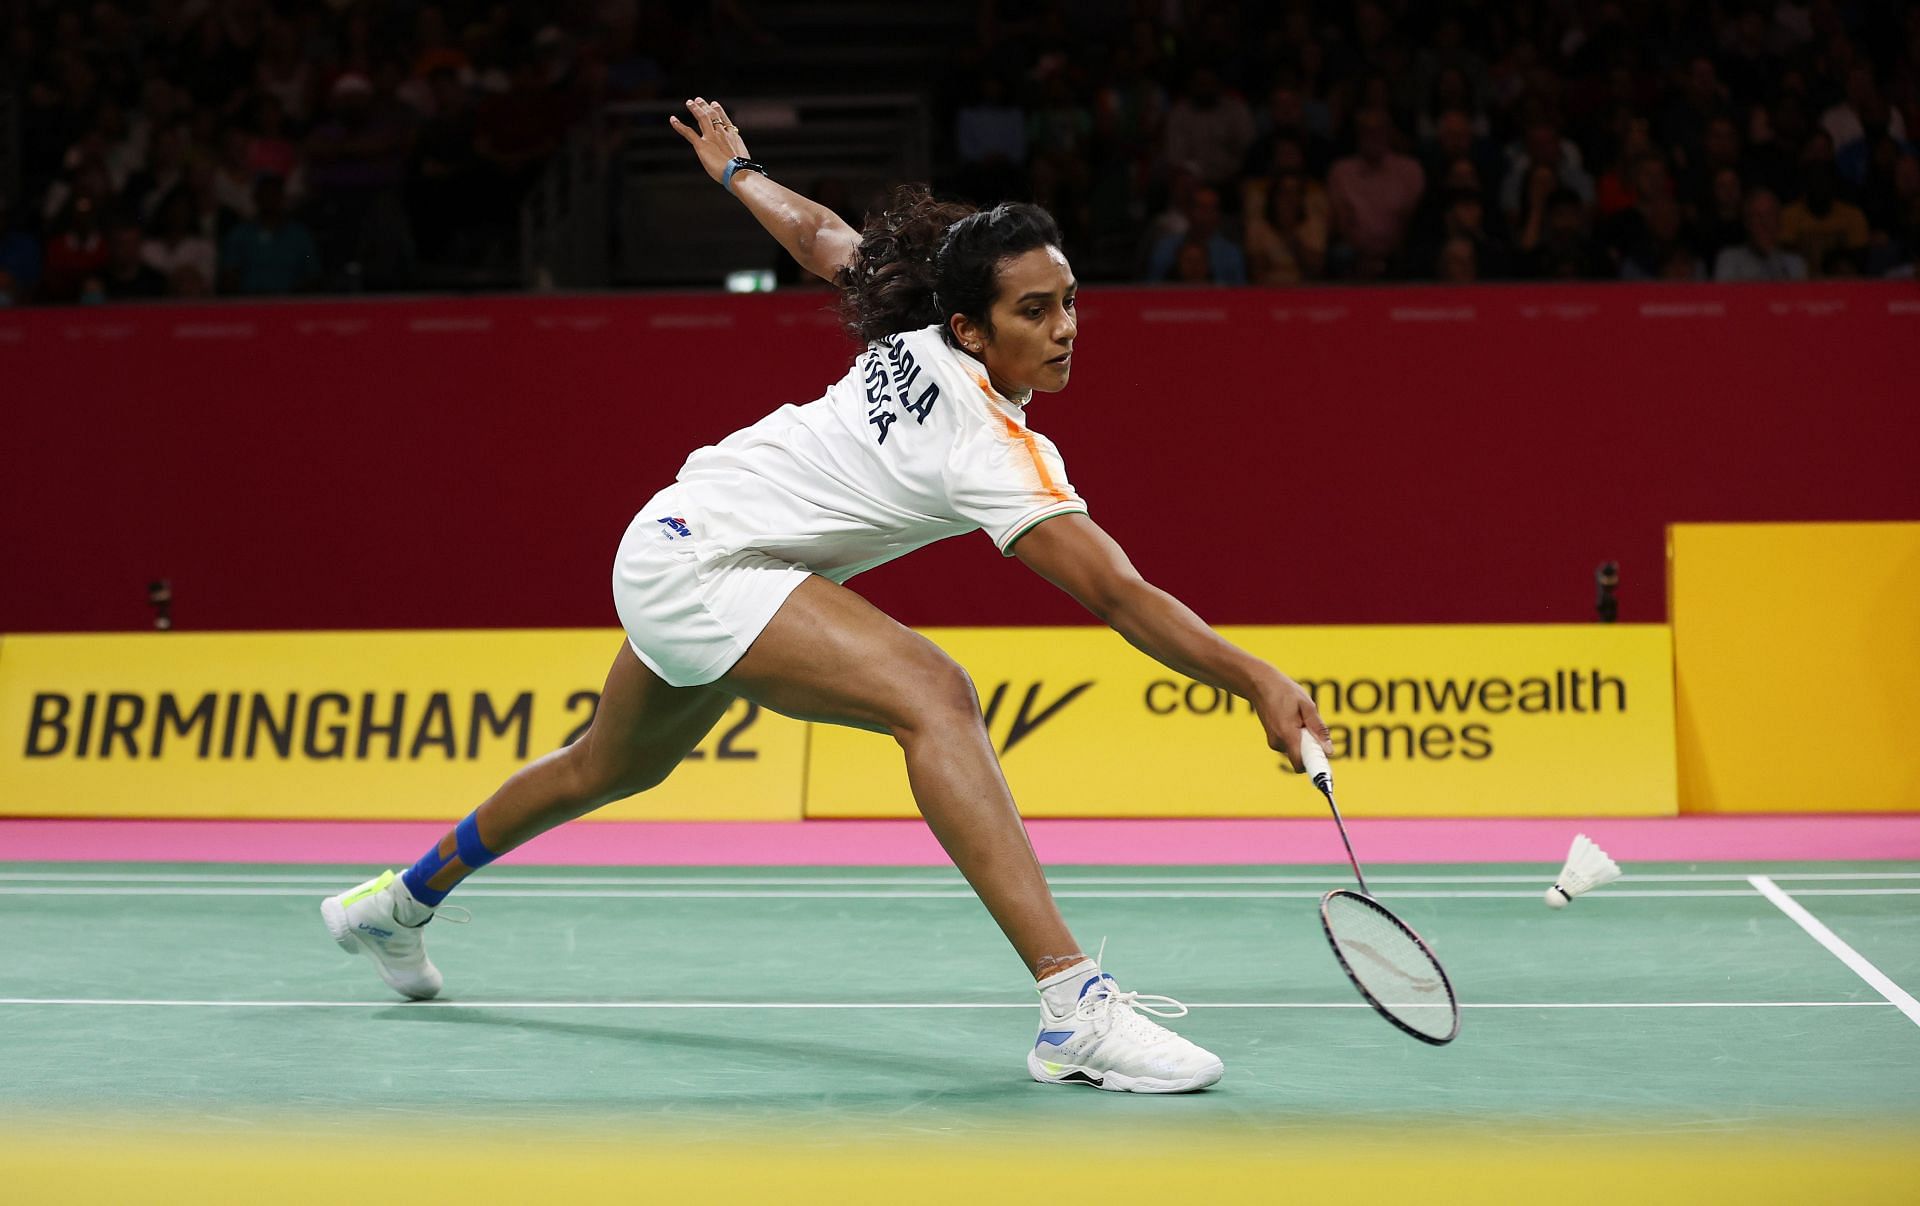 PV Sindhu at the Commonwealth Games 2022 (Credits: Getty)